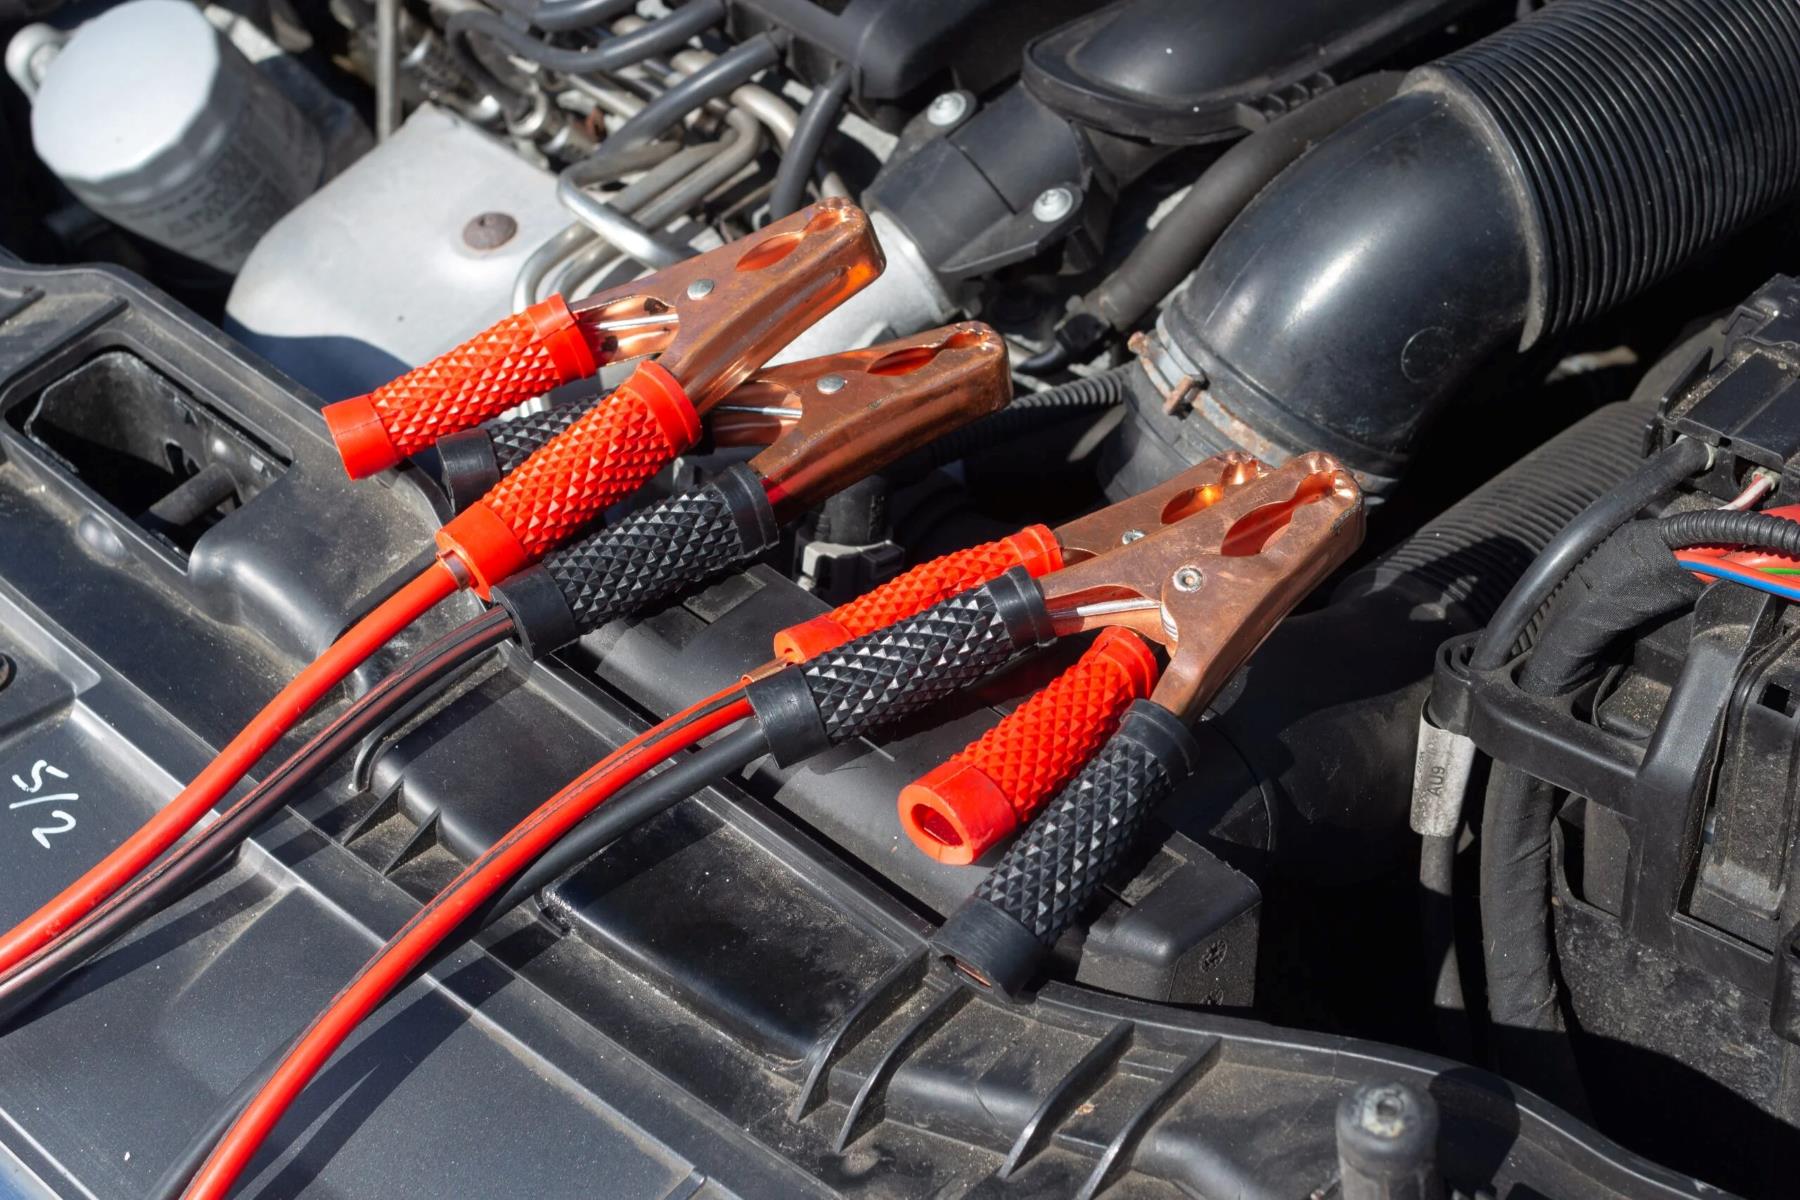 Jumper Cable Basics: Connecting To A Battery